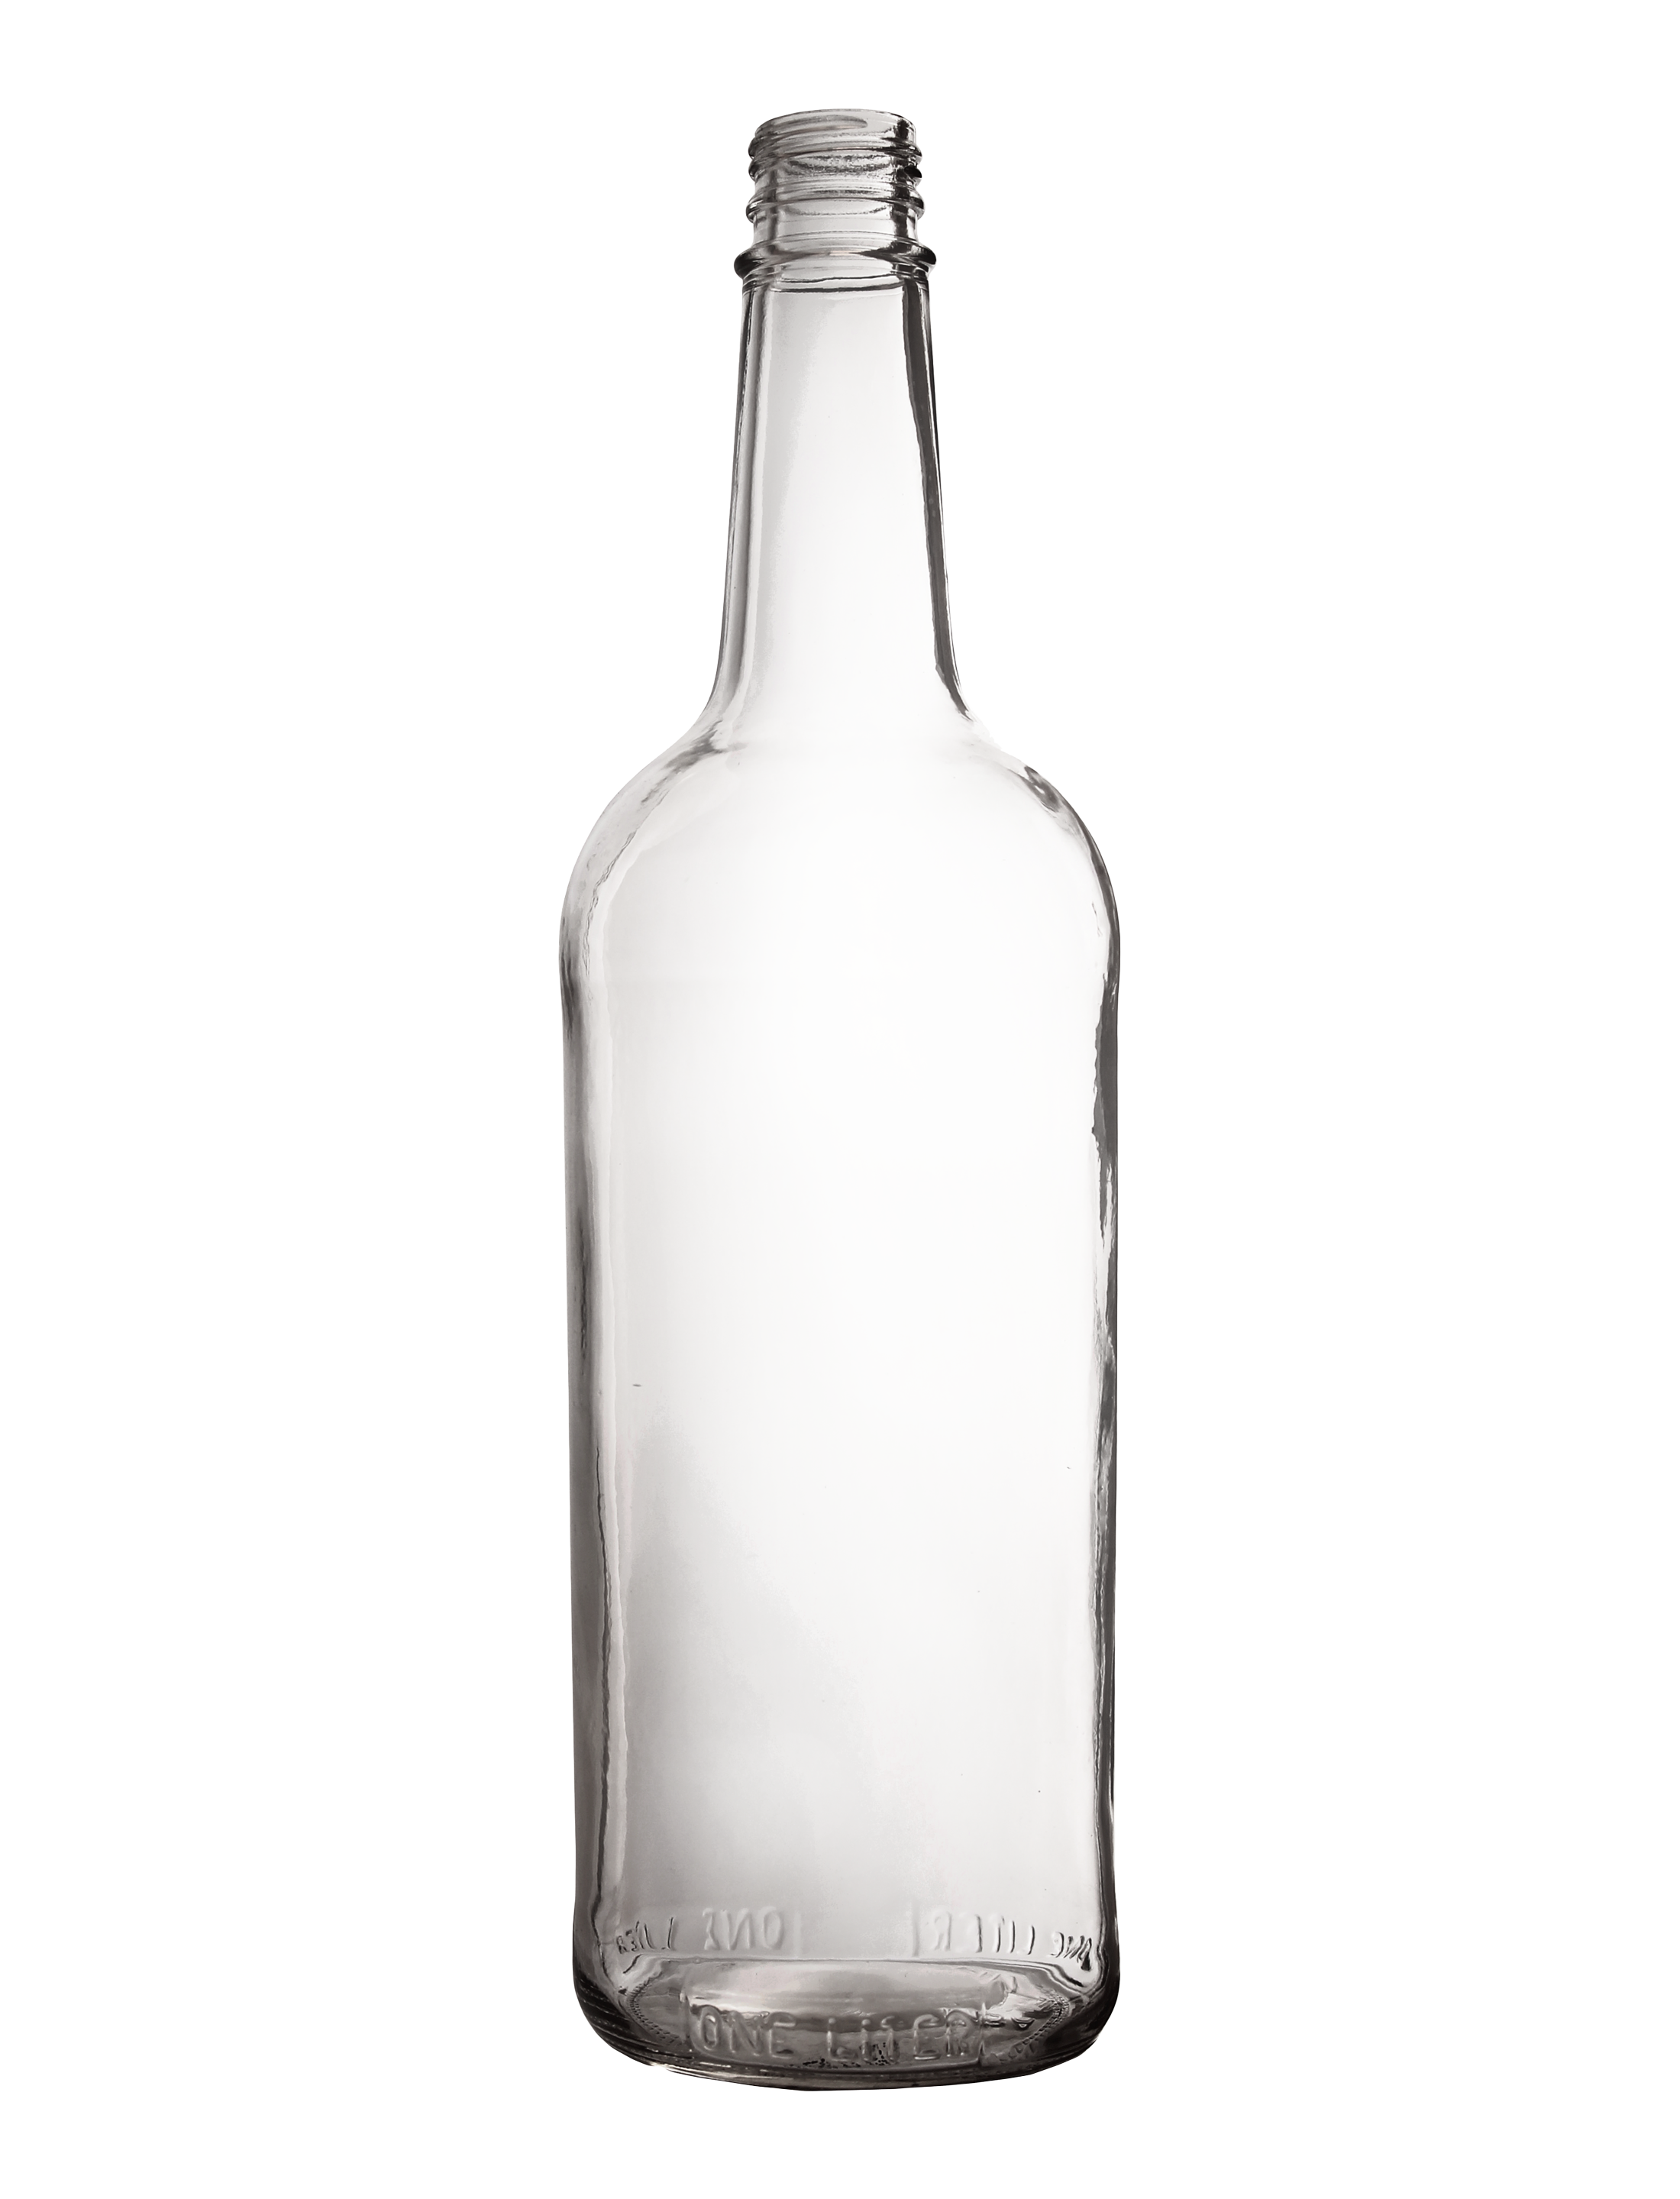 Water Bottle Png image #39990